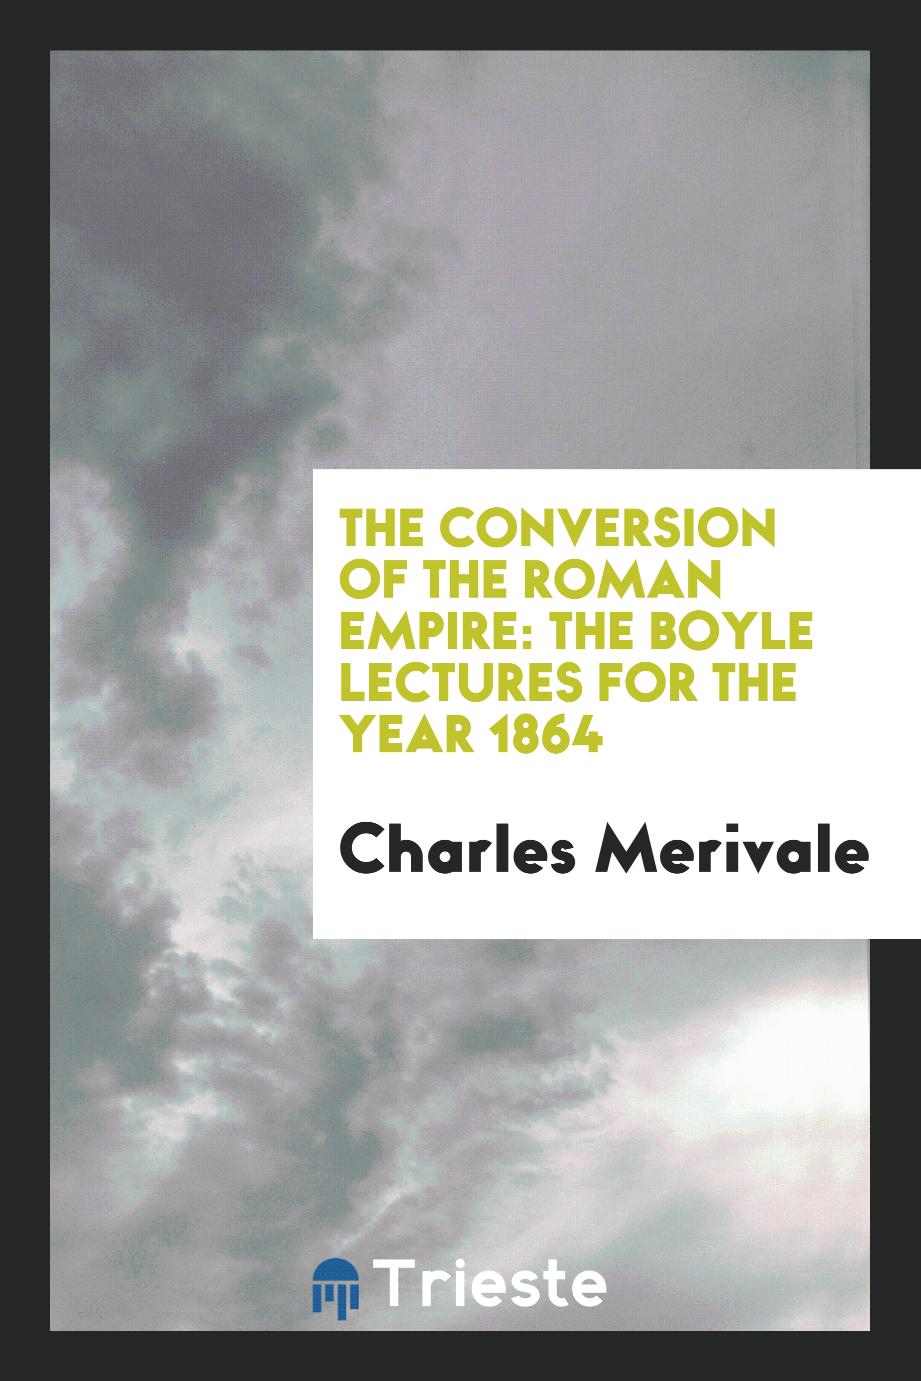 Charles Merivale - The Conversion of the Roman Empire: The Boyle Lectures for the Year 1864